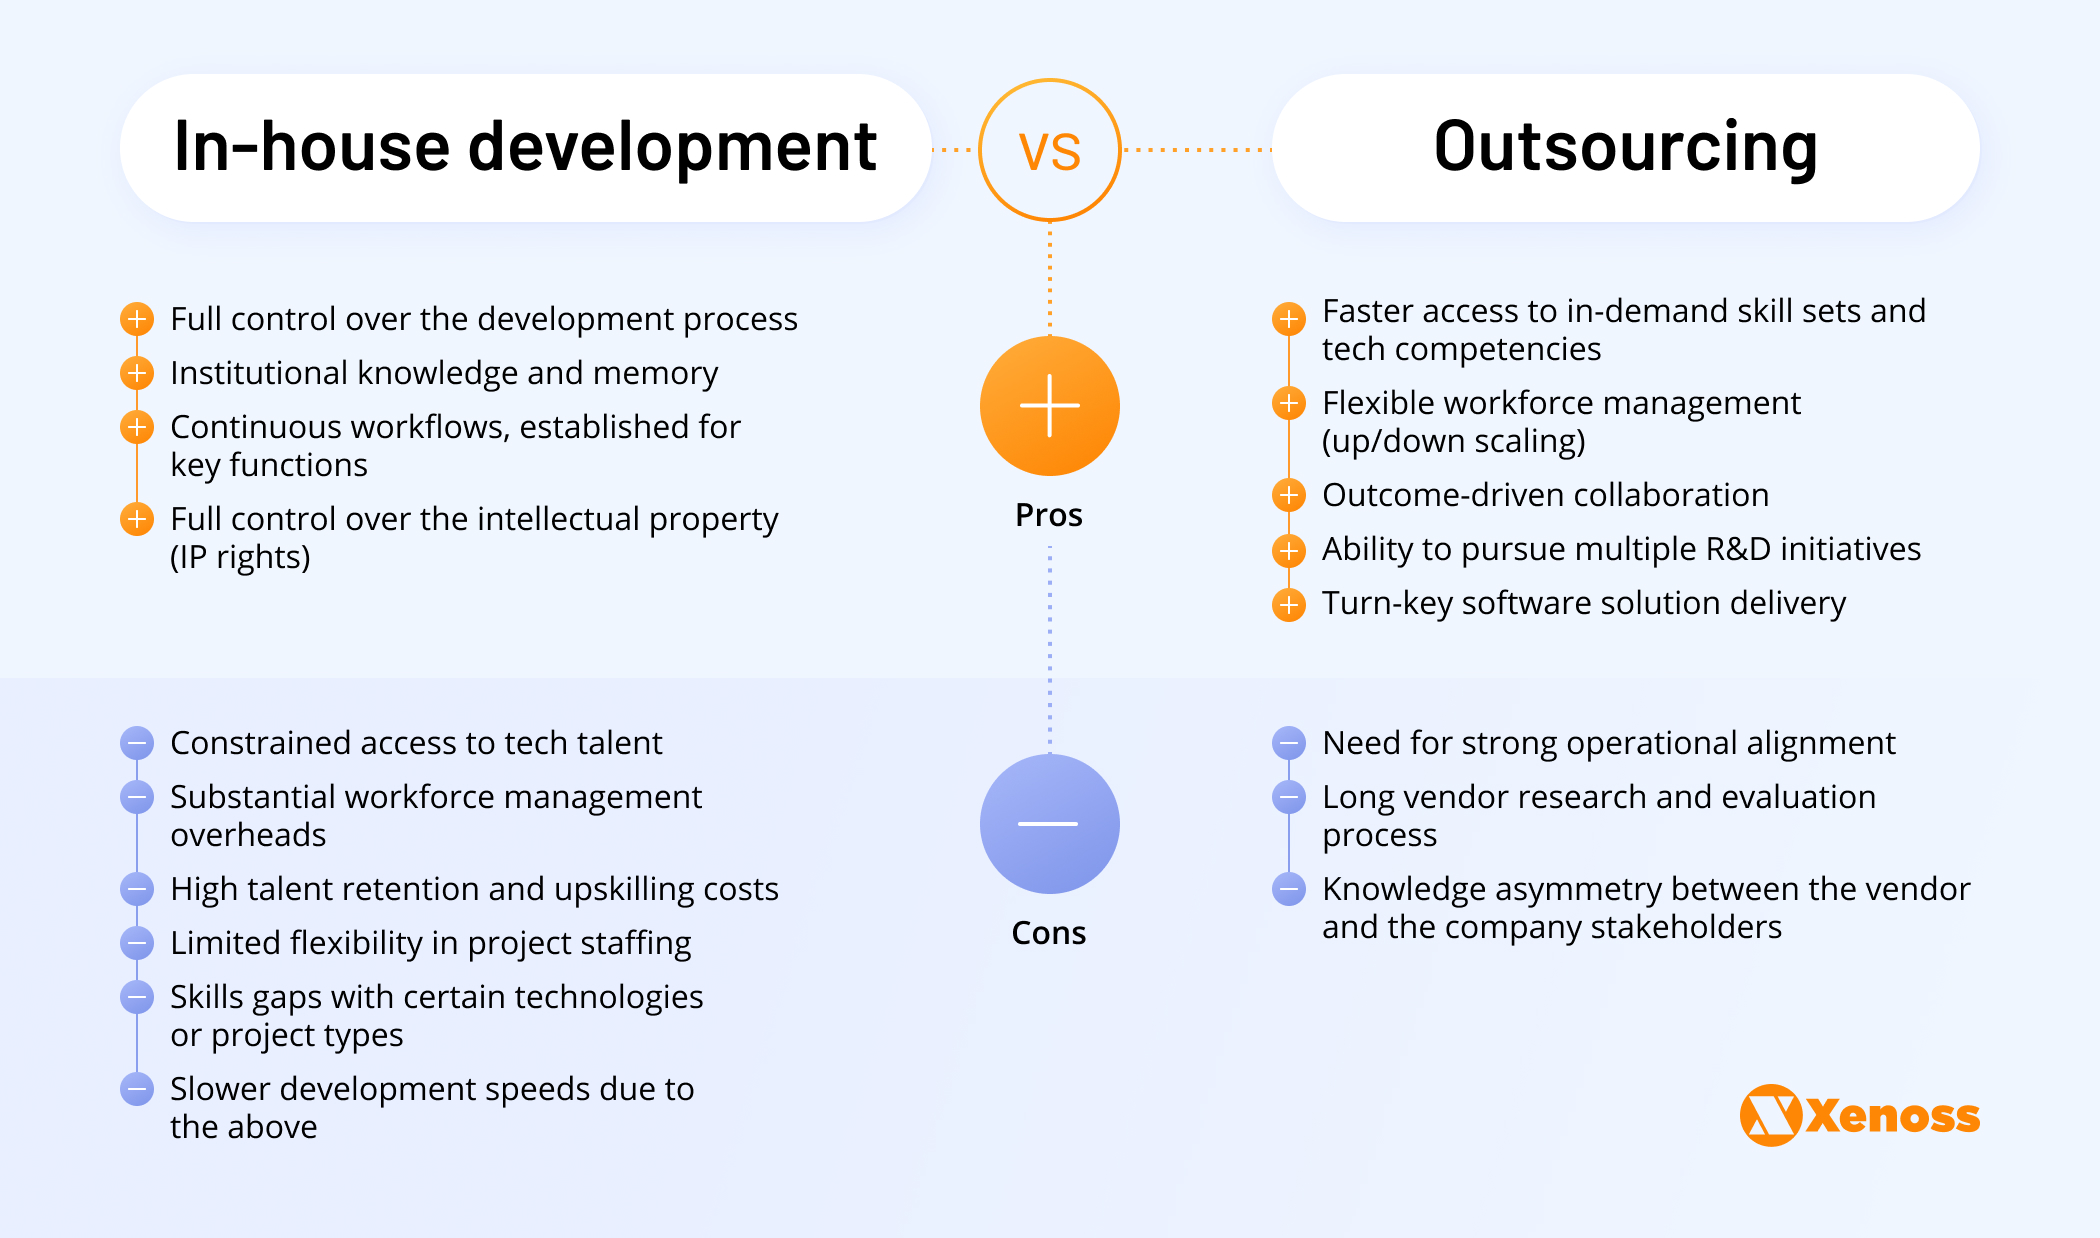 Benefits and downsides of tf outsourcing vs. in-house development | Xenoss Blog